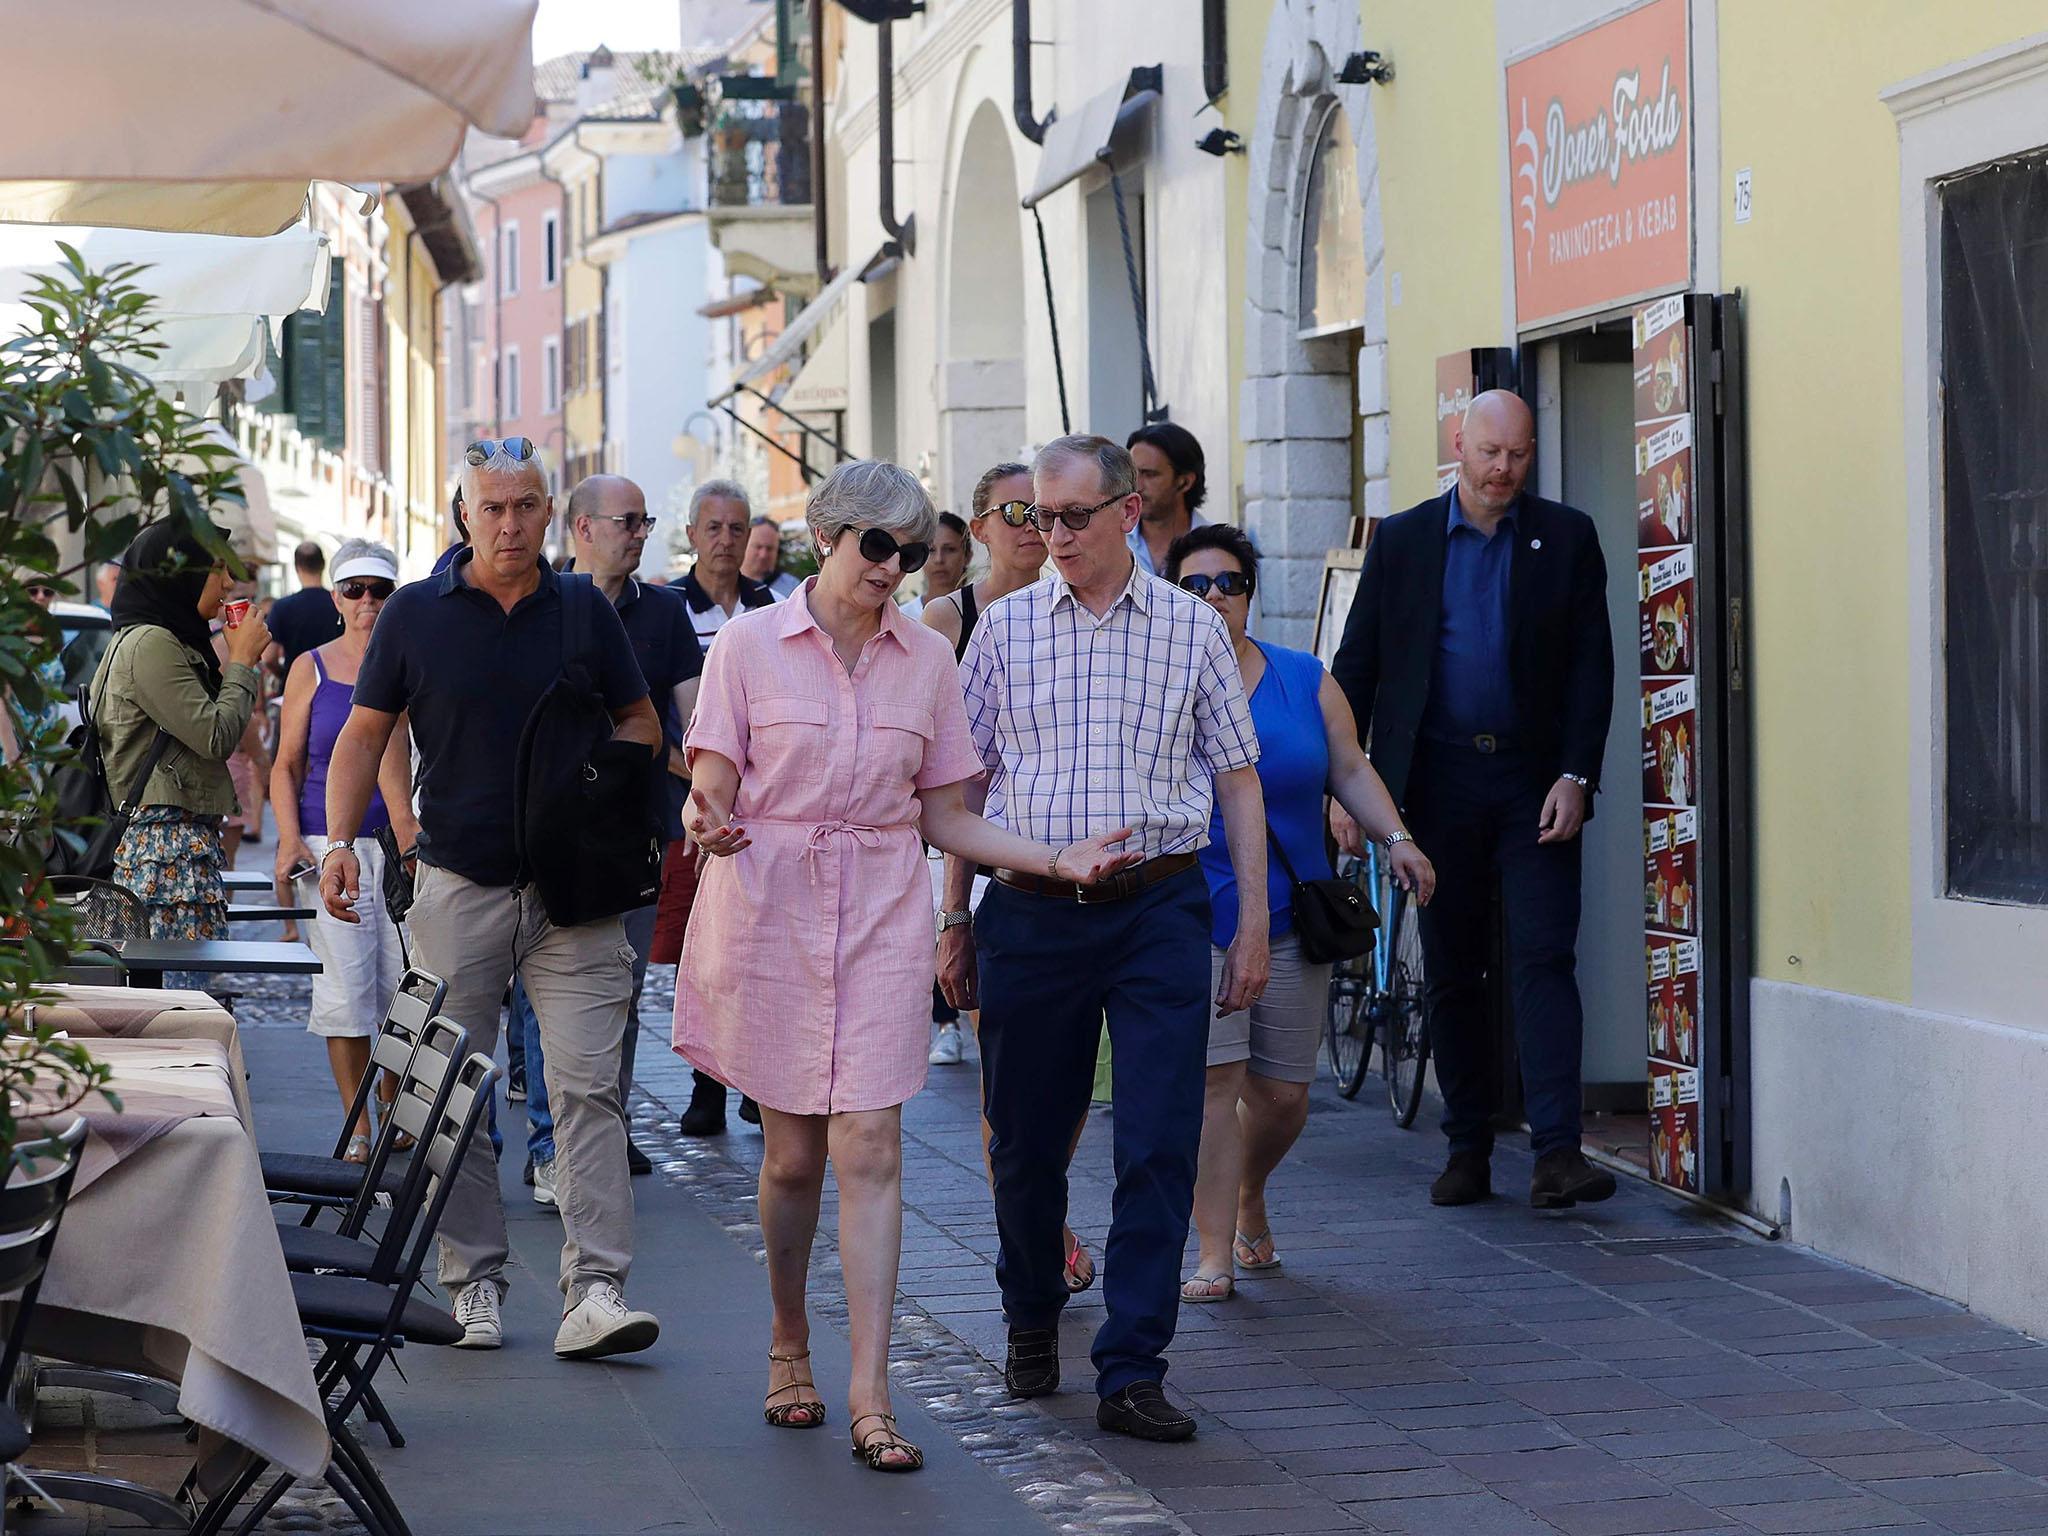 Theresa and Philip May take the air in Lake Garda on Tuesday: perhaps mindful of the fateful decision taken the last time she took a holiday, the PM may be keeping things light this time